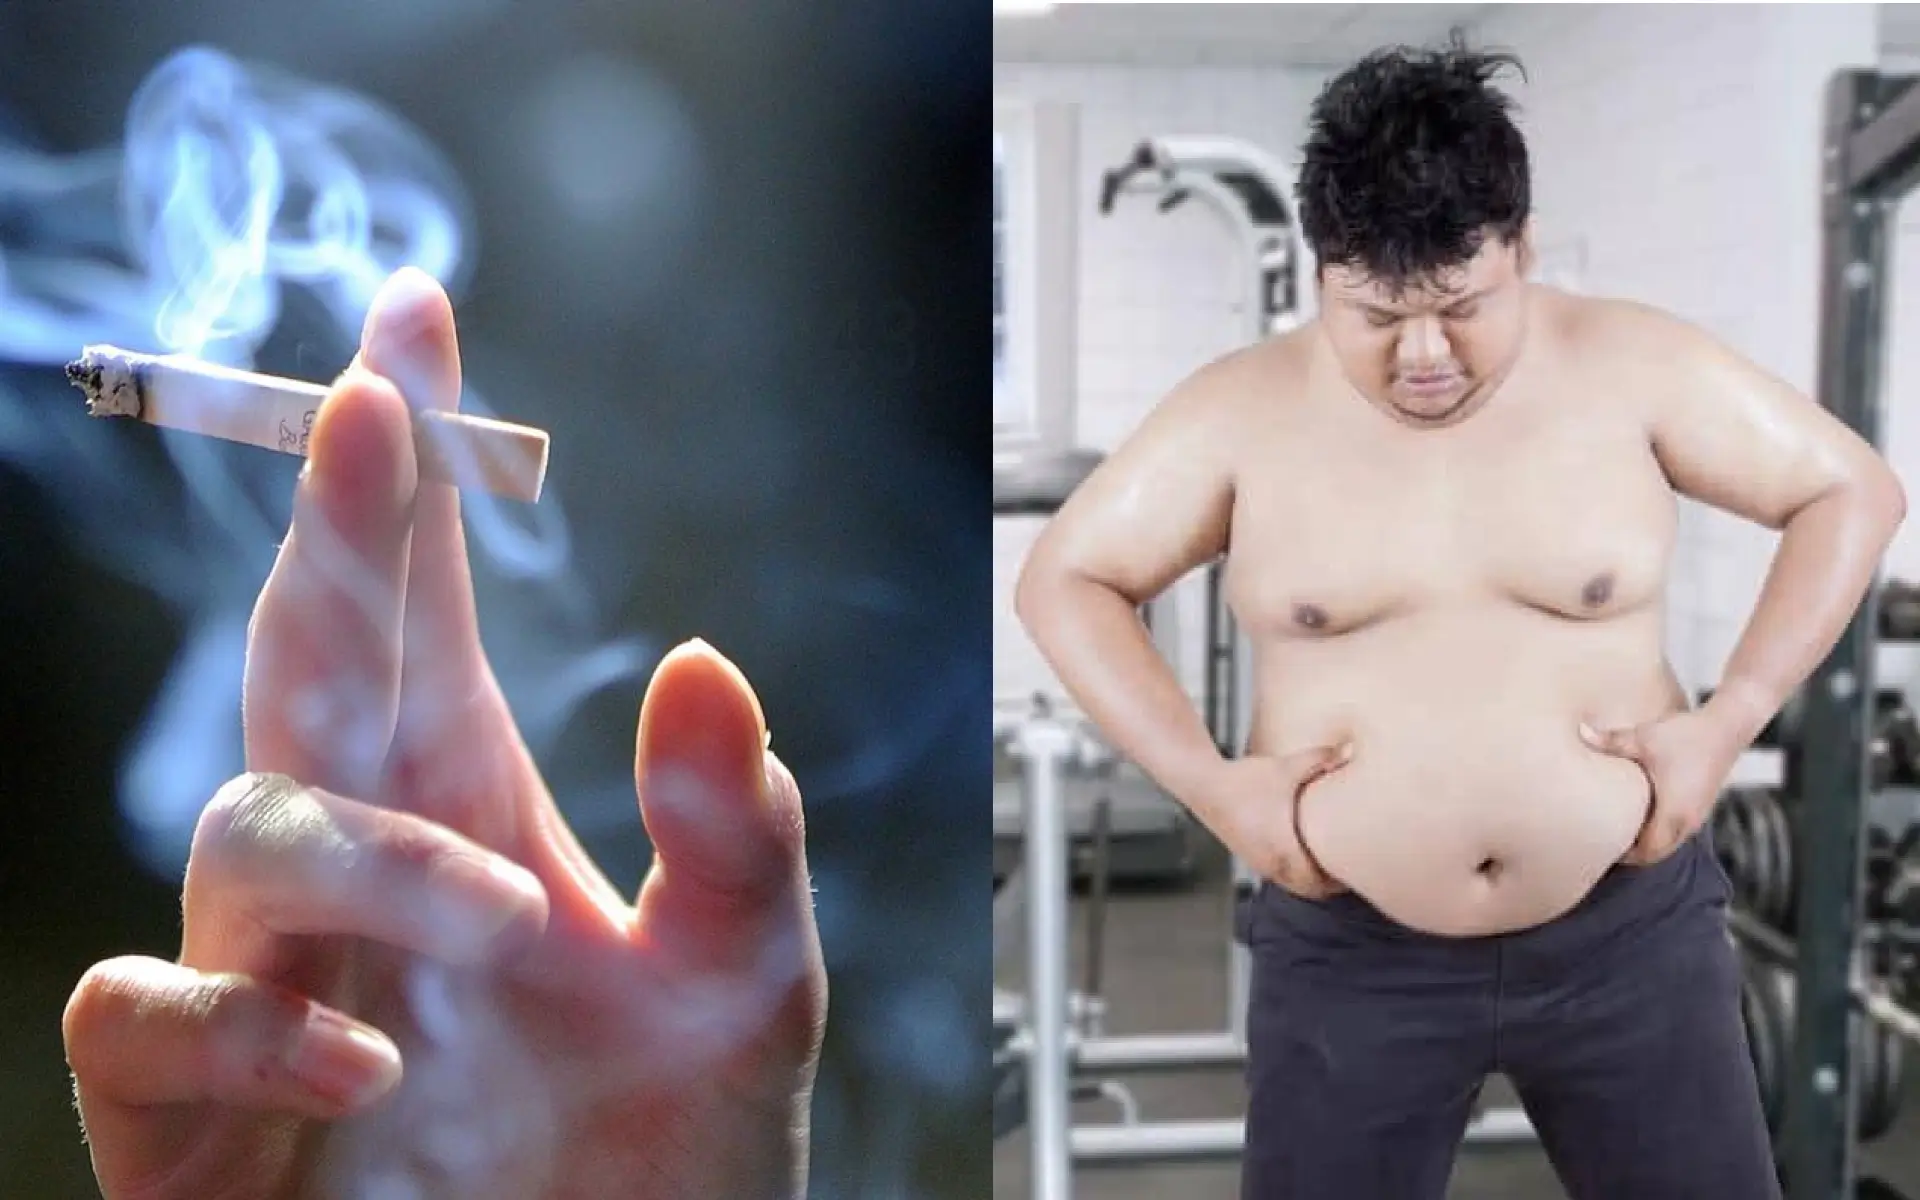 Smoking Increases Belly Fat